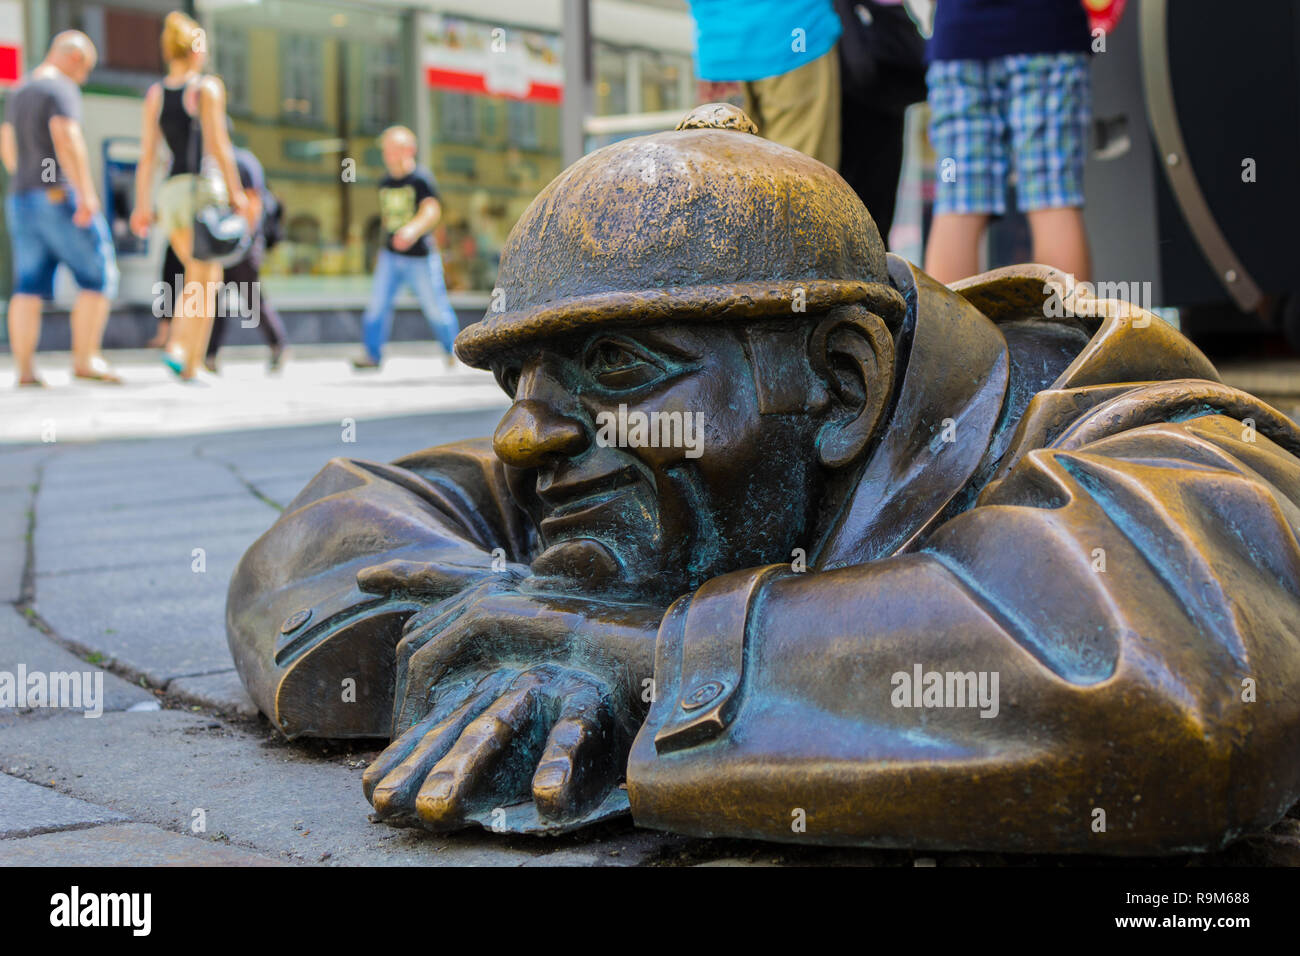 Statue of a man peaking out from under a manhole cover in Bratislava, Slovakia on August 2018 Stock Photo